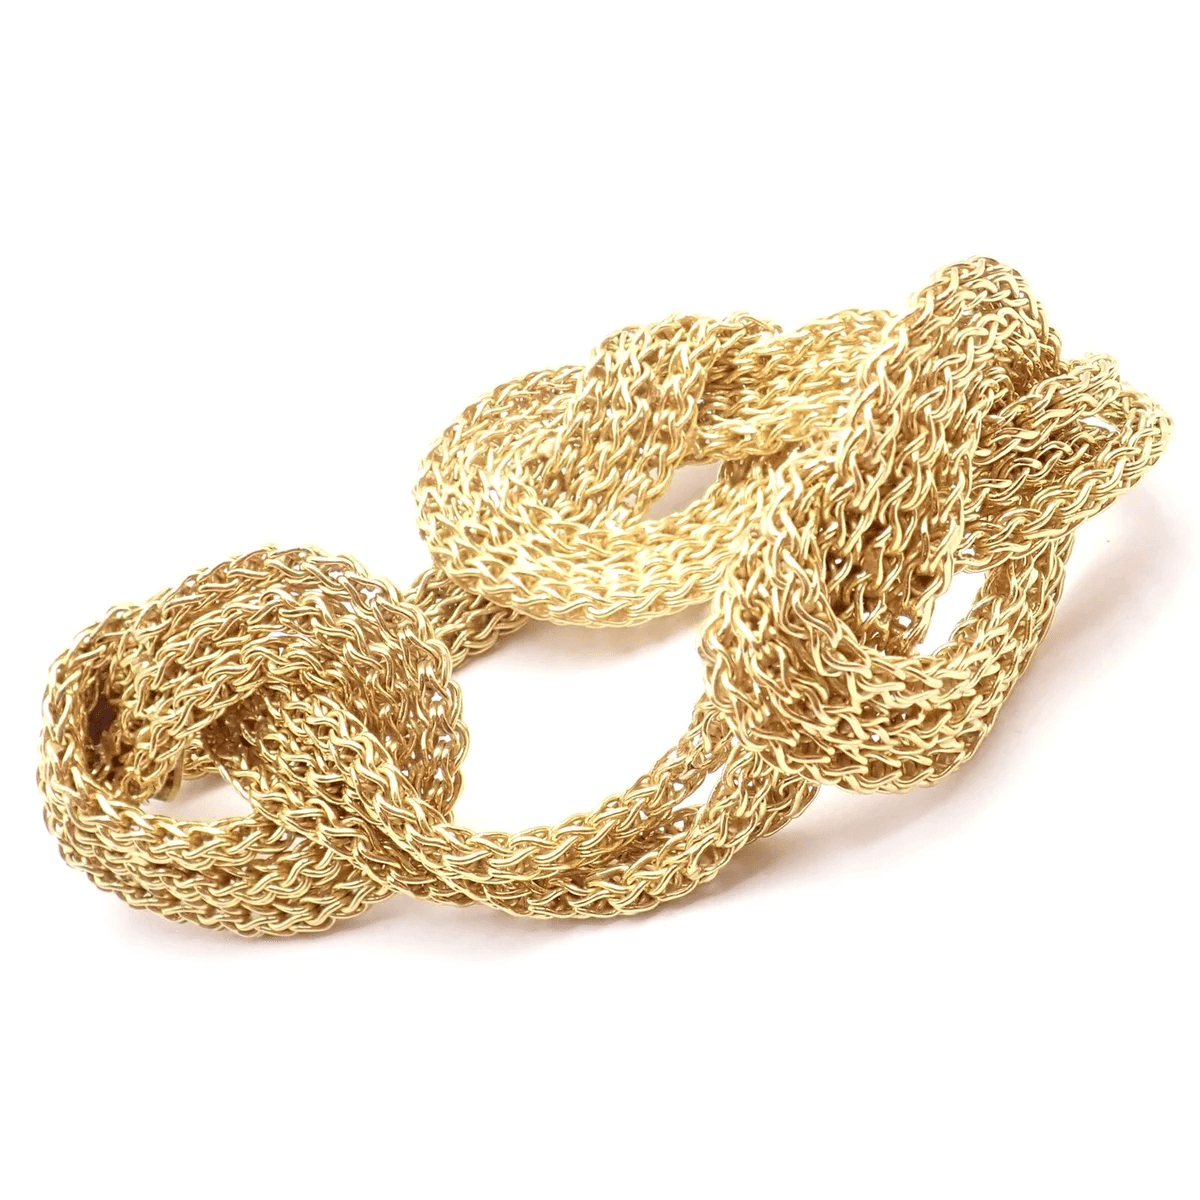 Tiffany & Co. Post-1980s 18KT Yellow Gold Woven Knot Bracelet front